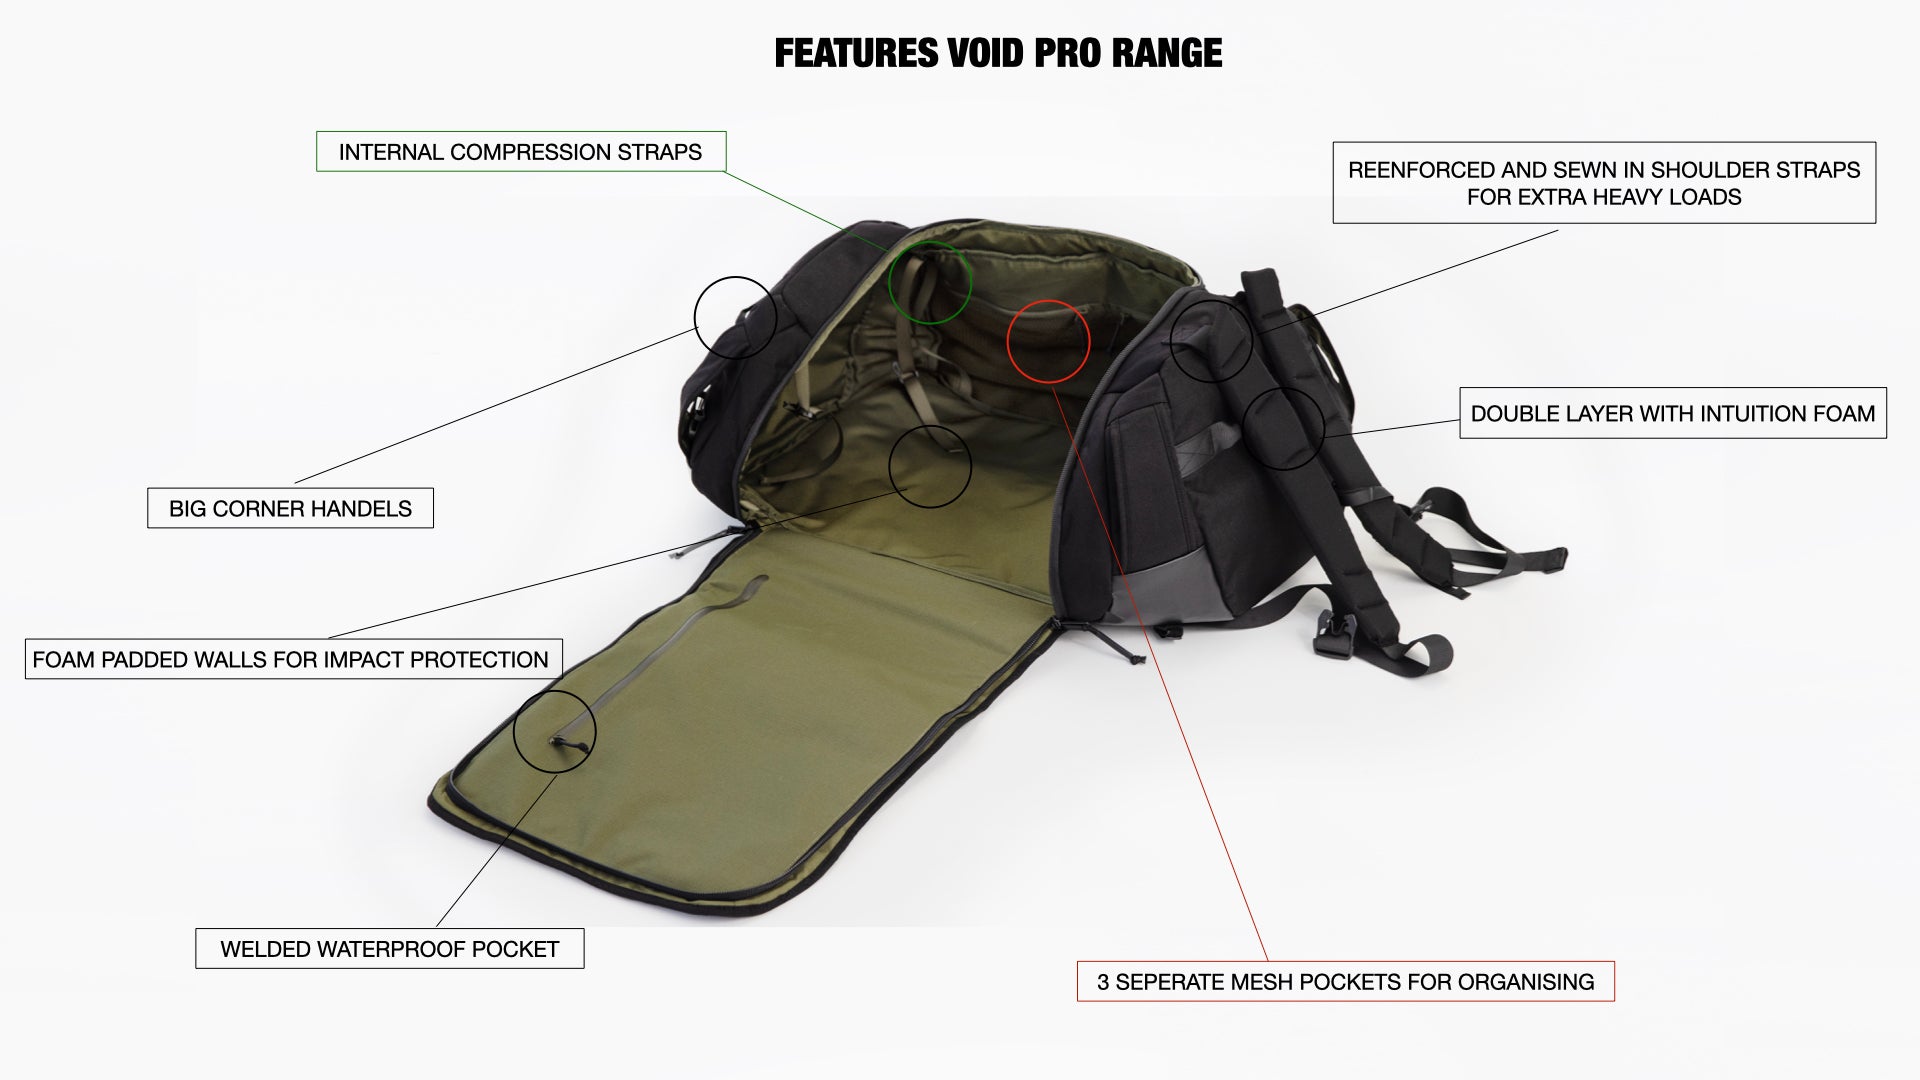 SHOWS FEATURES ON VOID 110 PRO BLACK AND GREEN